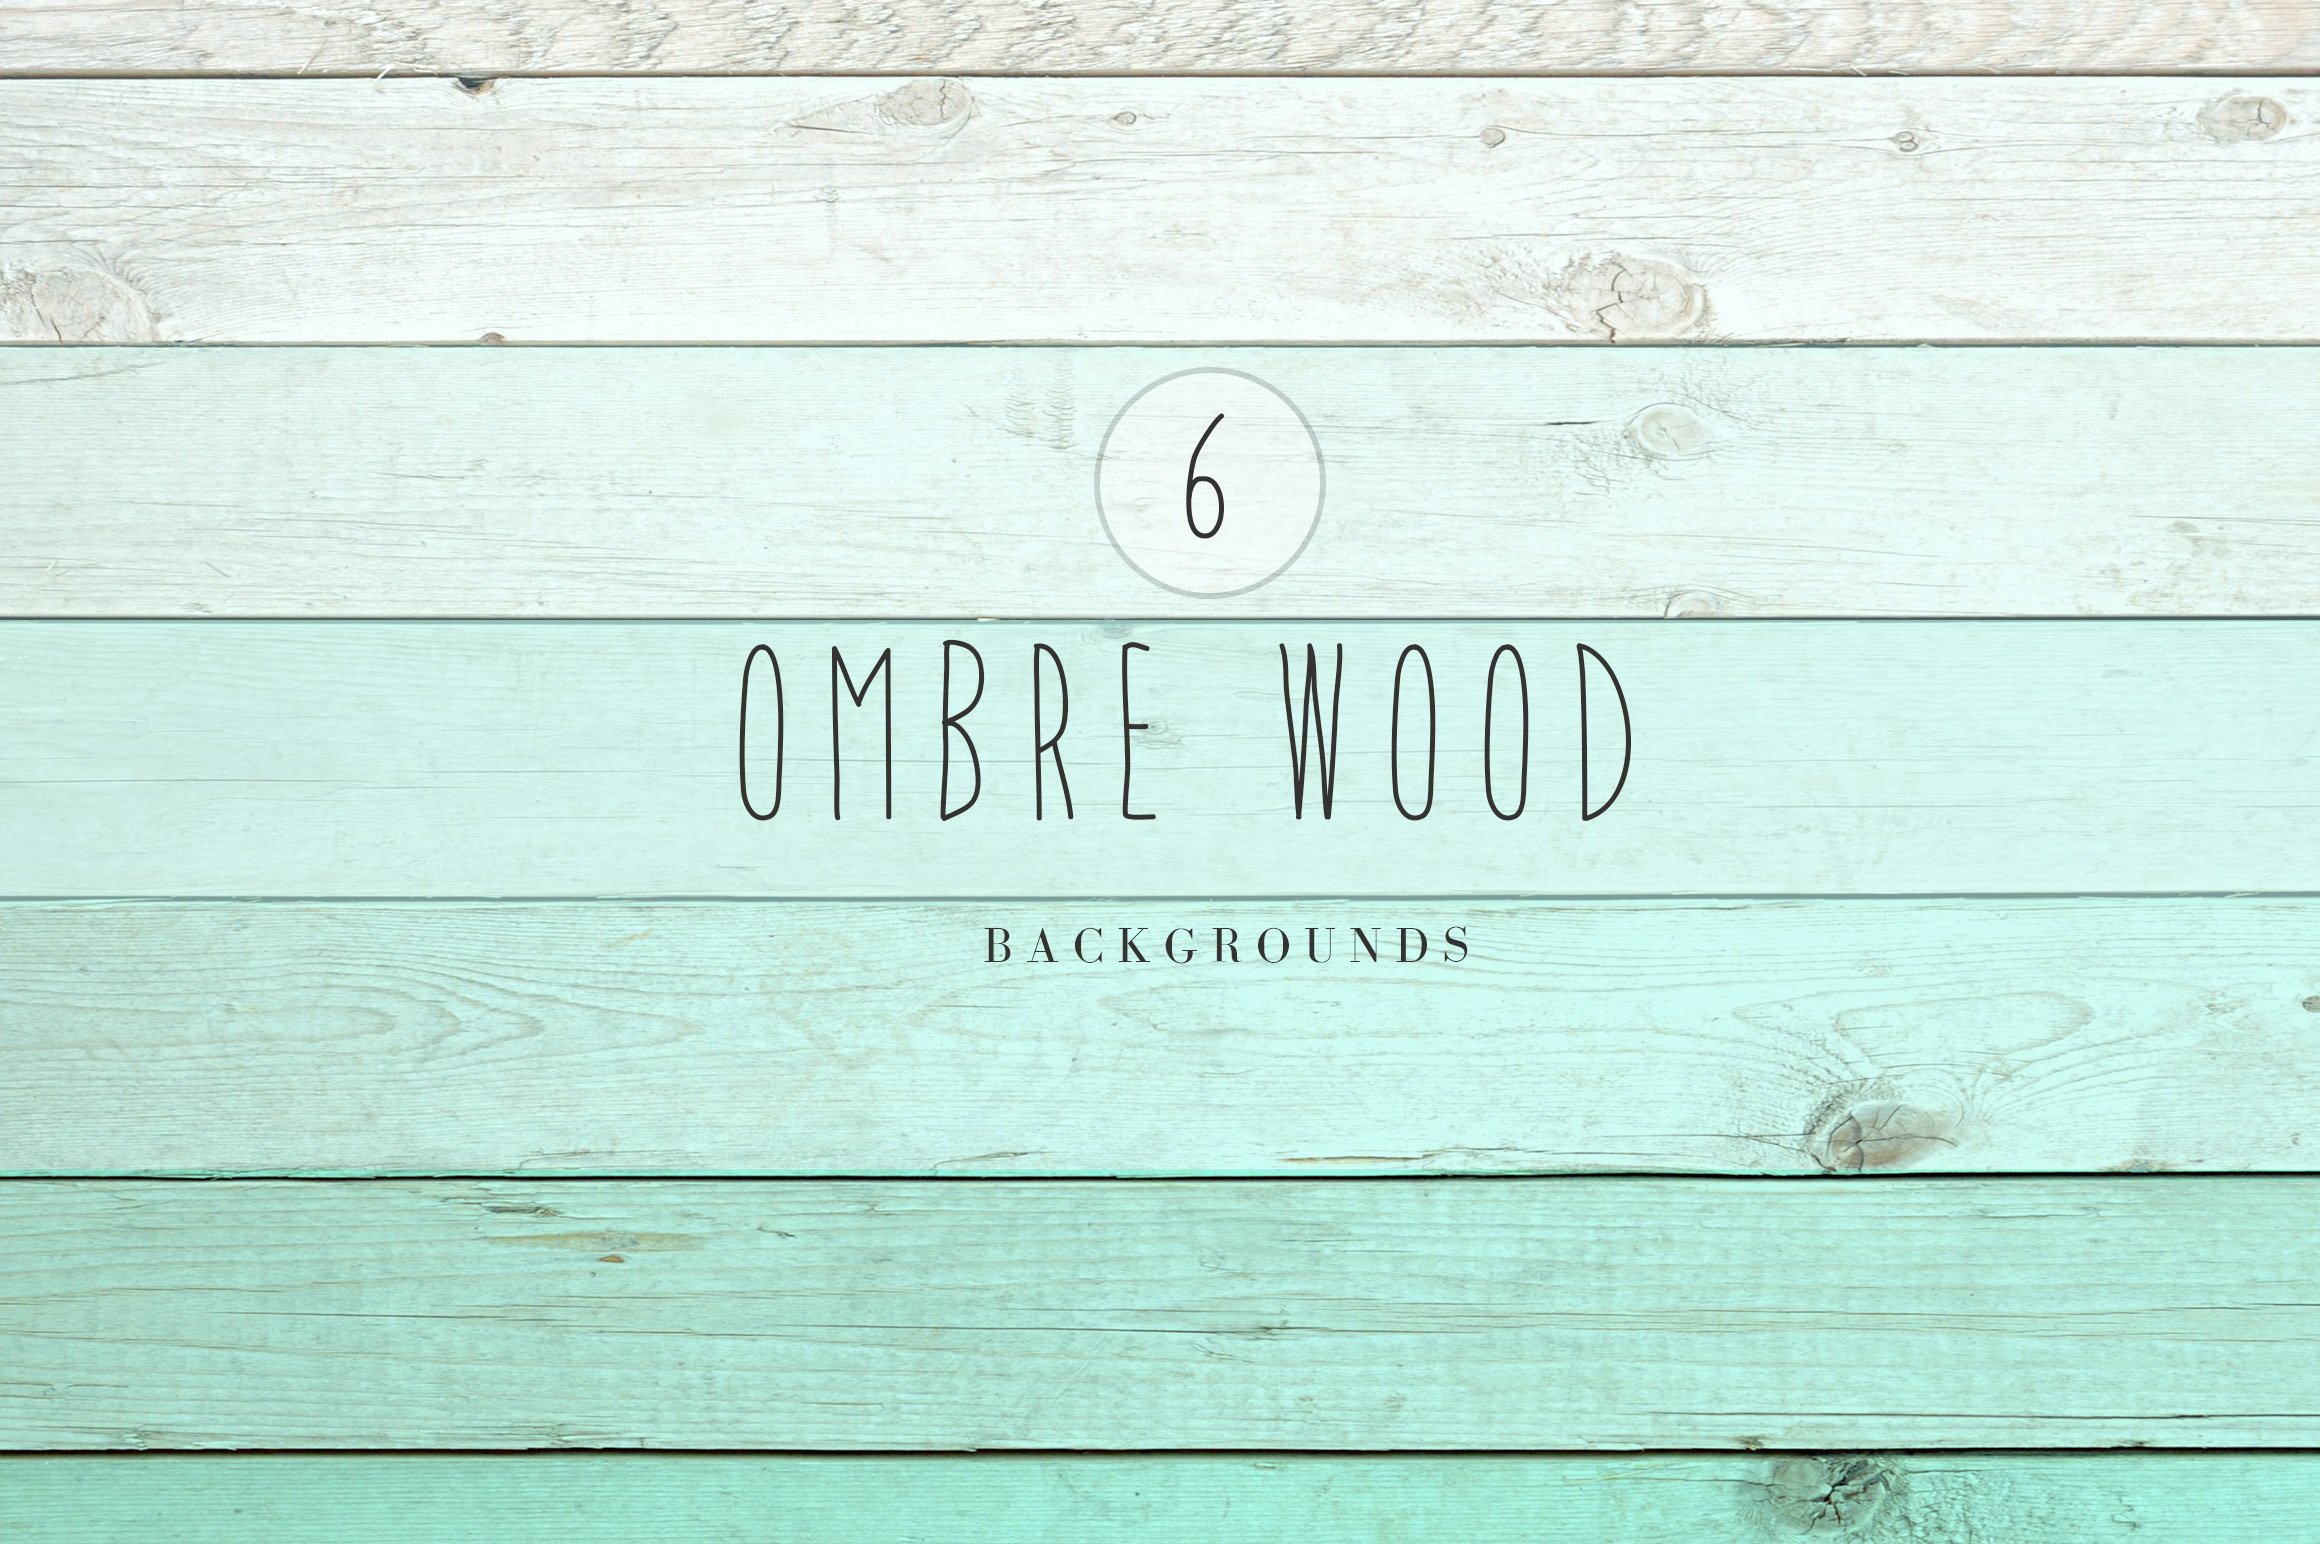 Ombre wood backgrounds cover image.